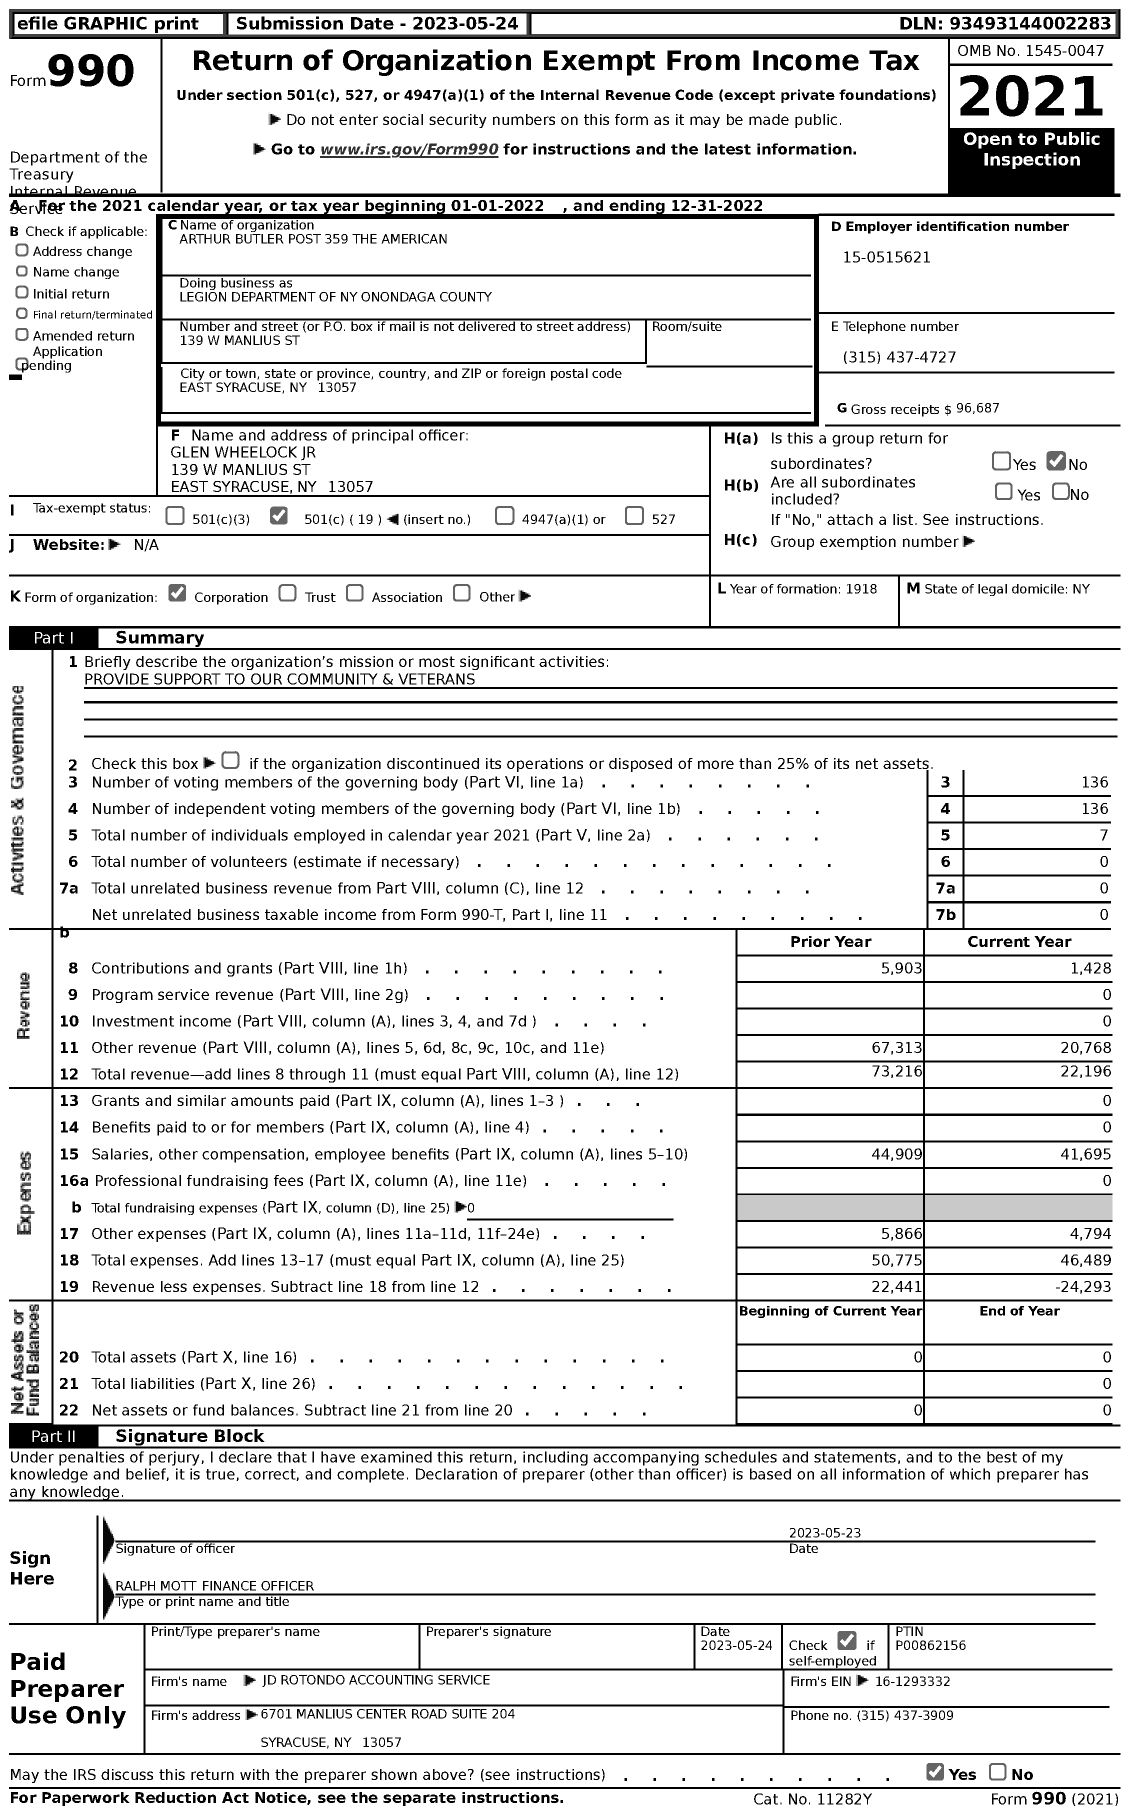 Image of first page of 2022 Form 990 for Legion Department of Ny Onondaga County